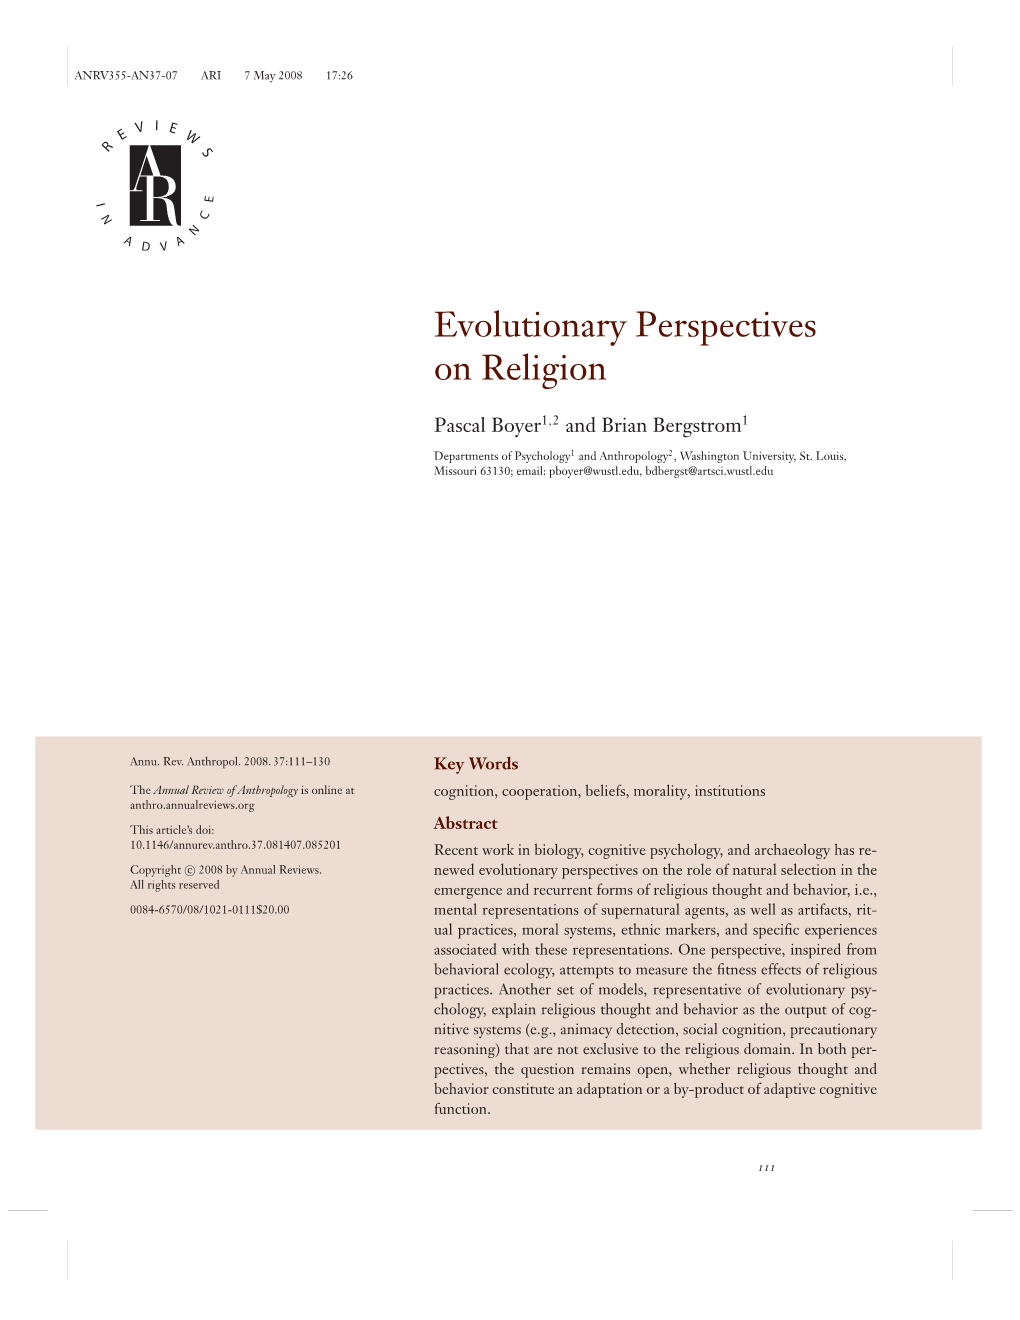 Evolutionary Perspectives on Religion